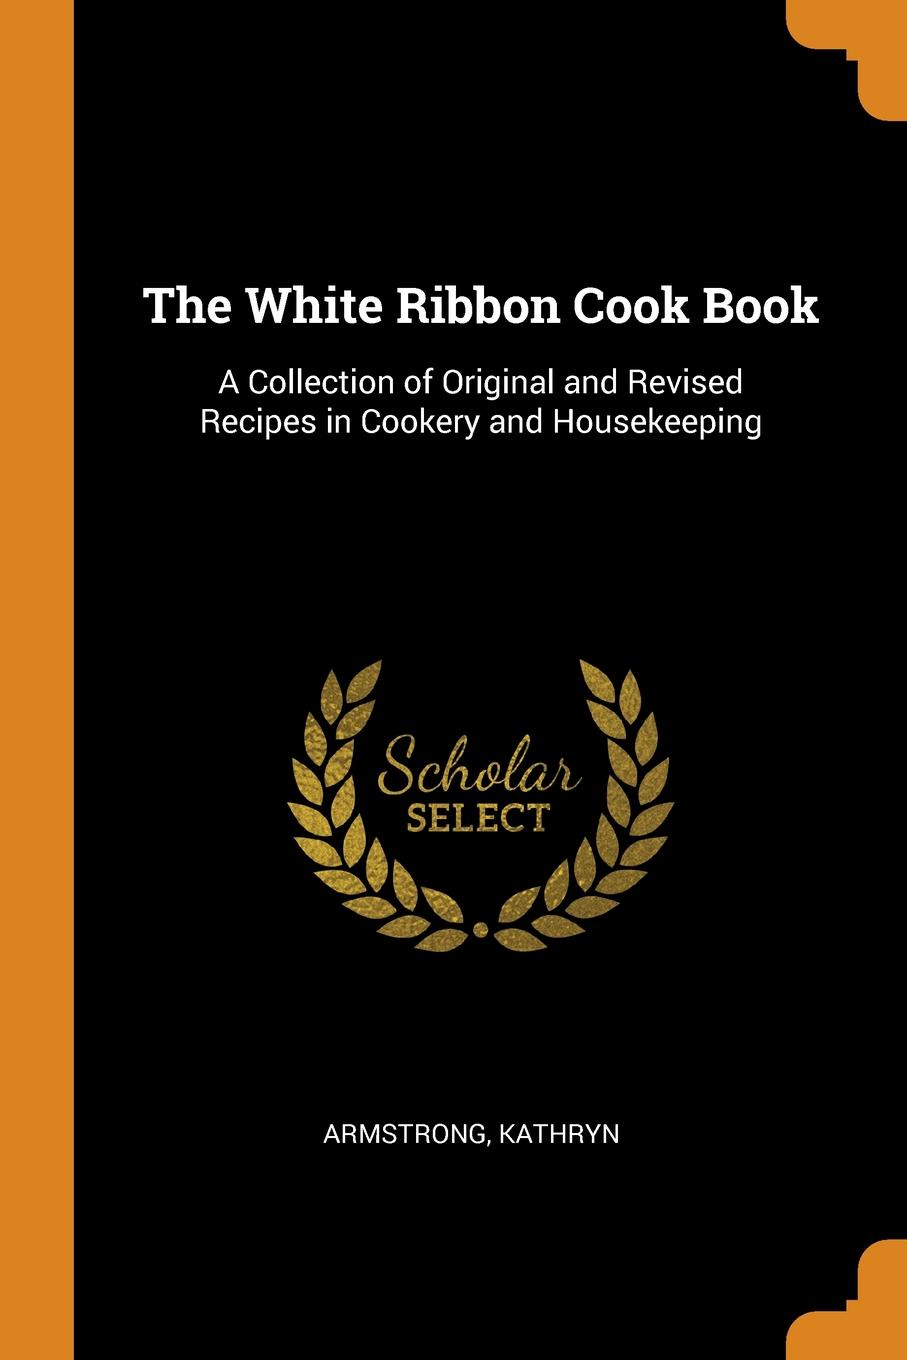 The White Ribbon Cook Book. A Collection of Original and Revised Recipes in Cookery and Housekeeping